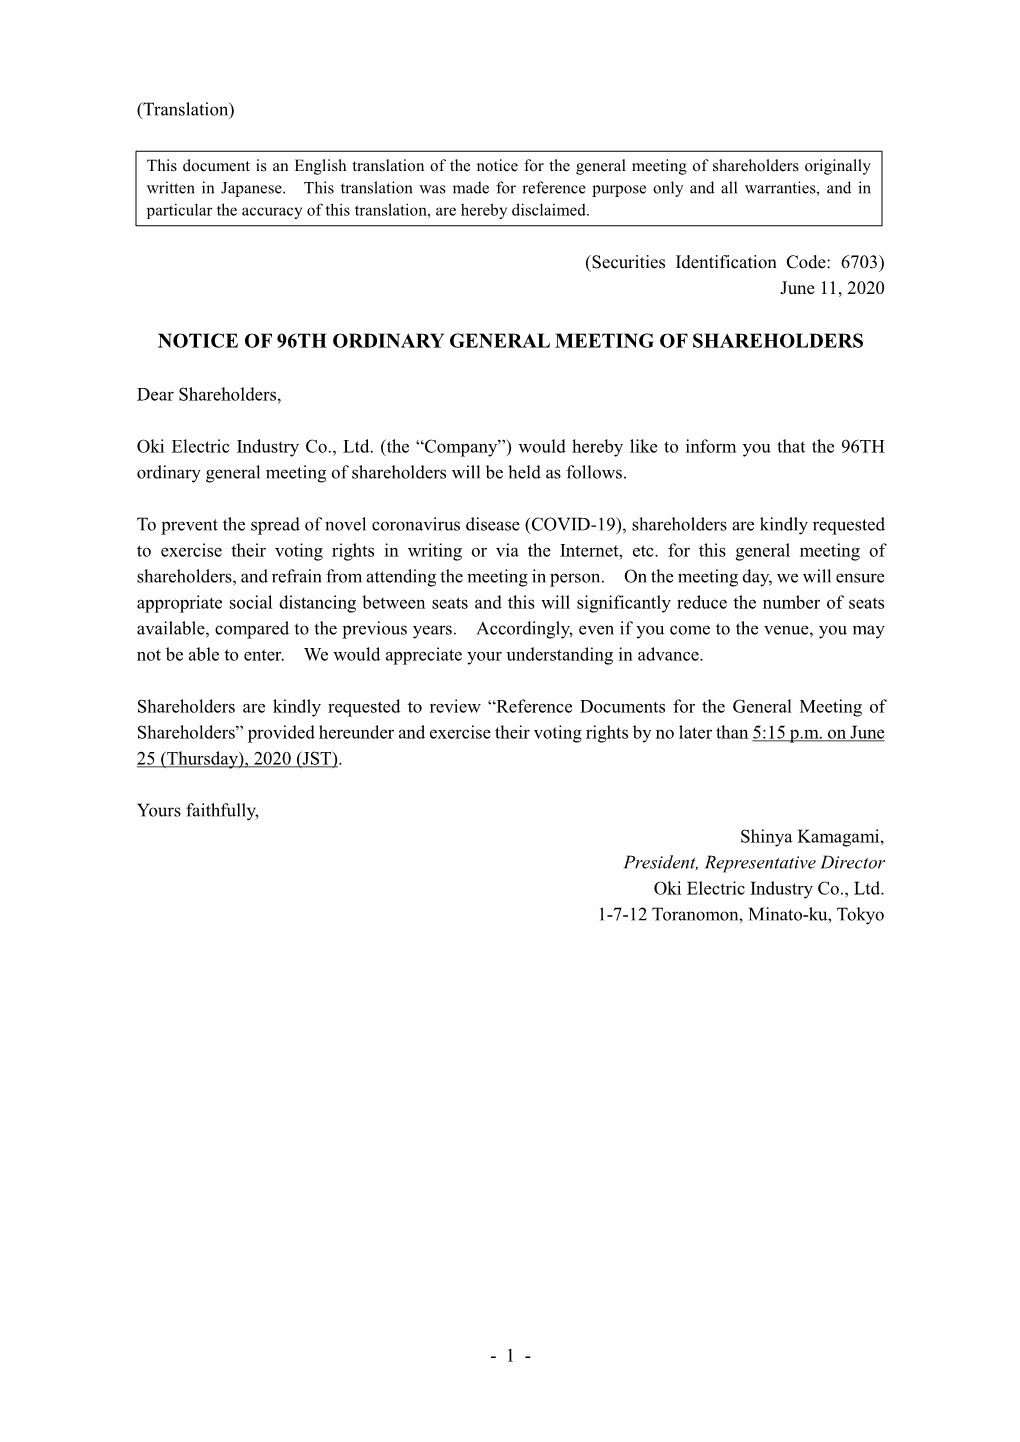 Notice of 96Th Ordinary General Meeting of Shareholders